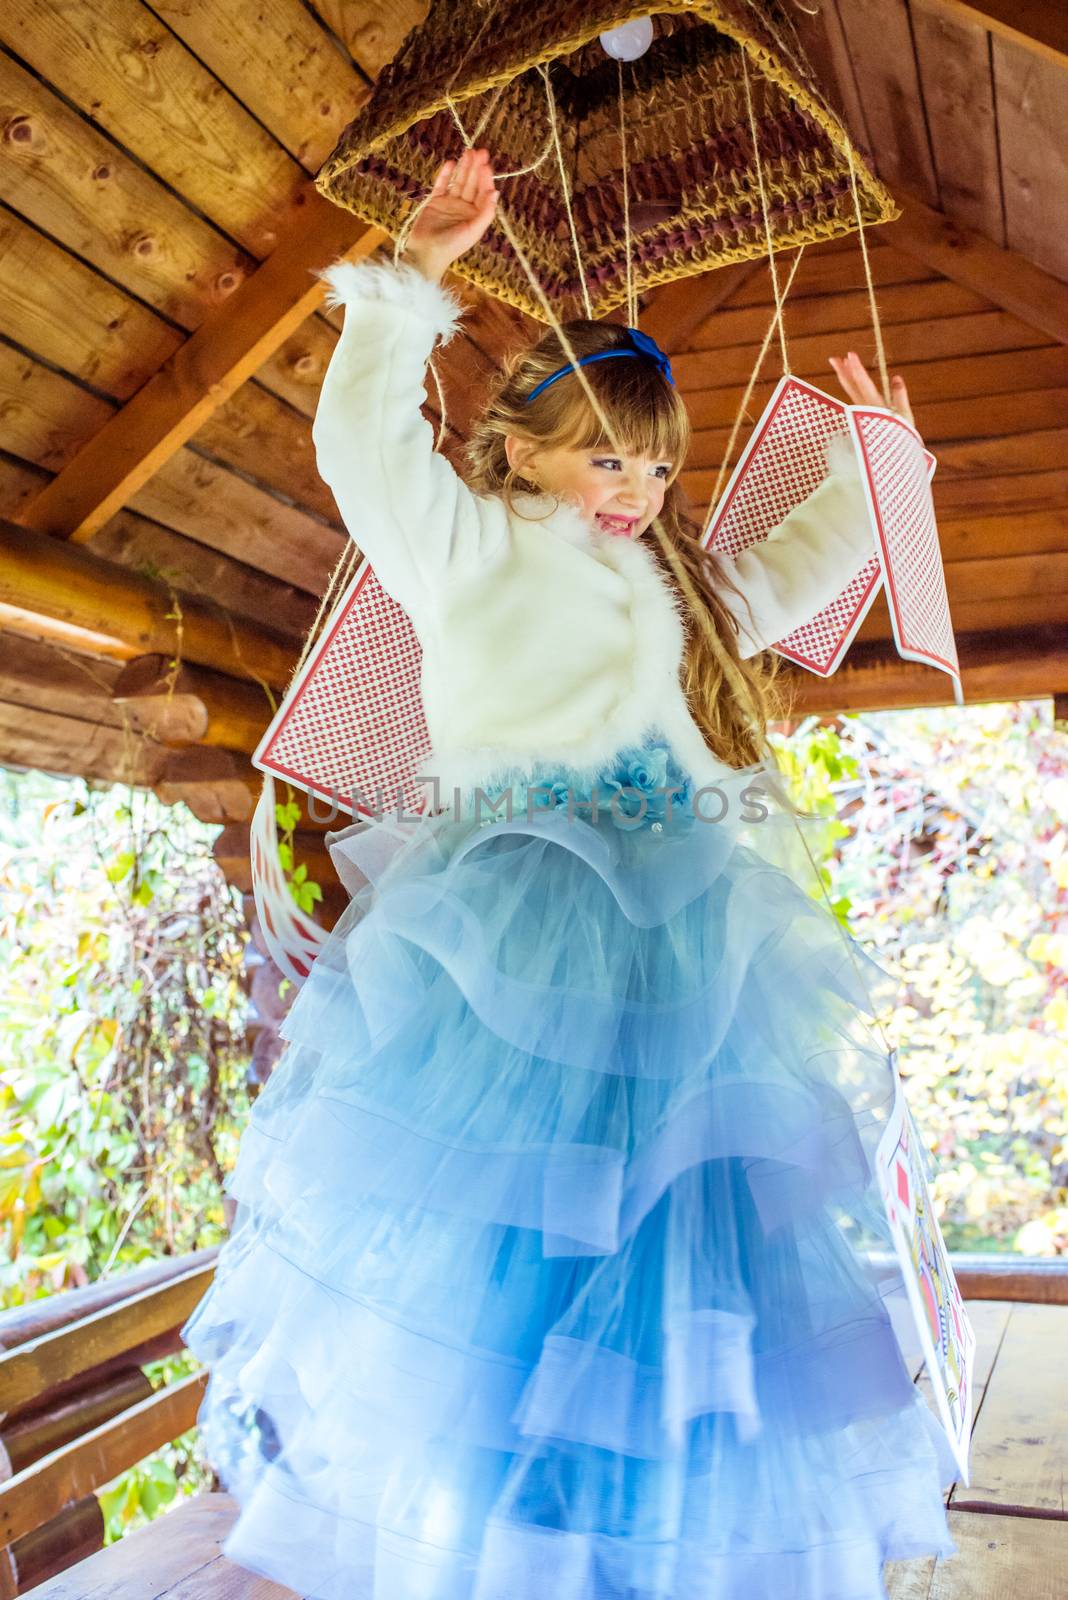 An little beautiful girl in a long blue dress in the scenery of Alice in Wonderland playing and dancing with large playing cards on the table in the garden.